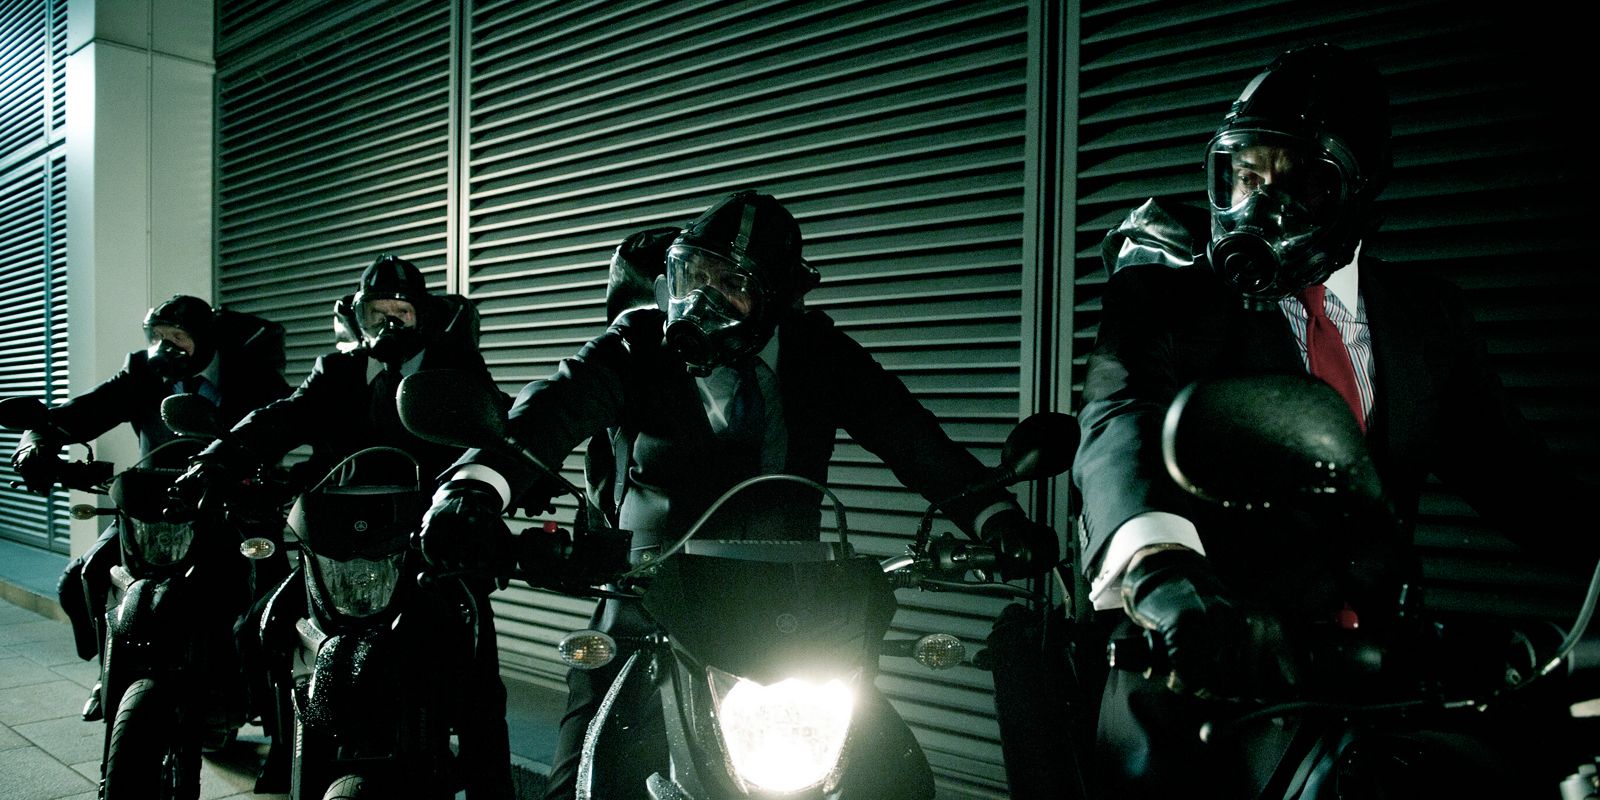 A gang of motorcycle thieves in Welcome To The Punch